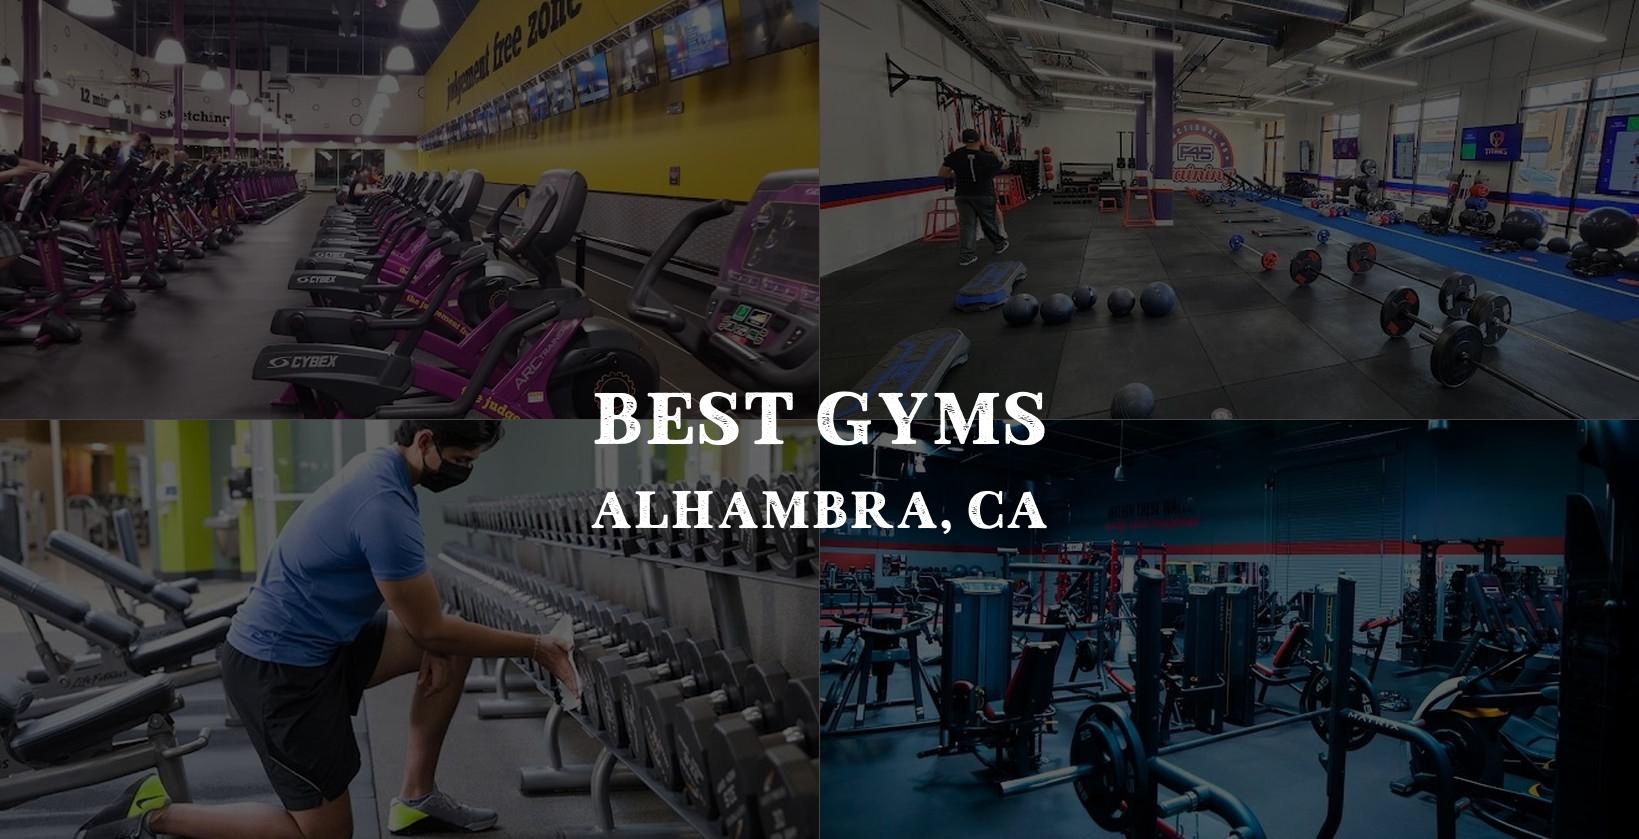 Choosing the right gym in Alhambra, CA